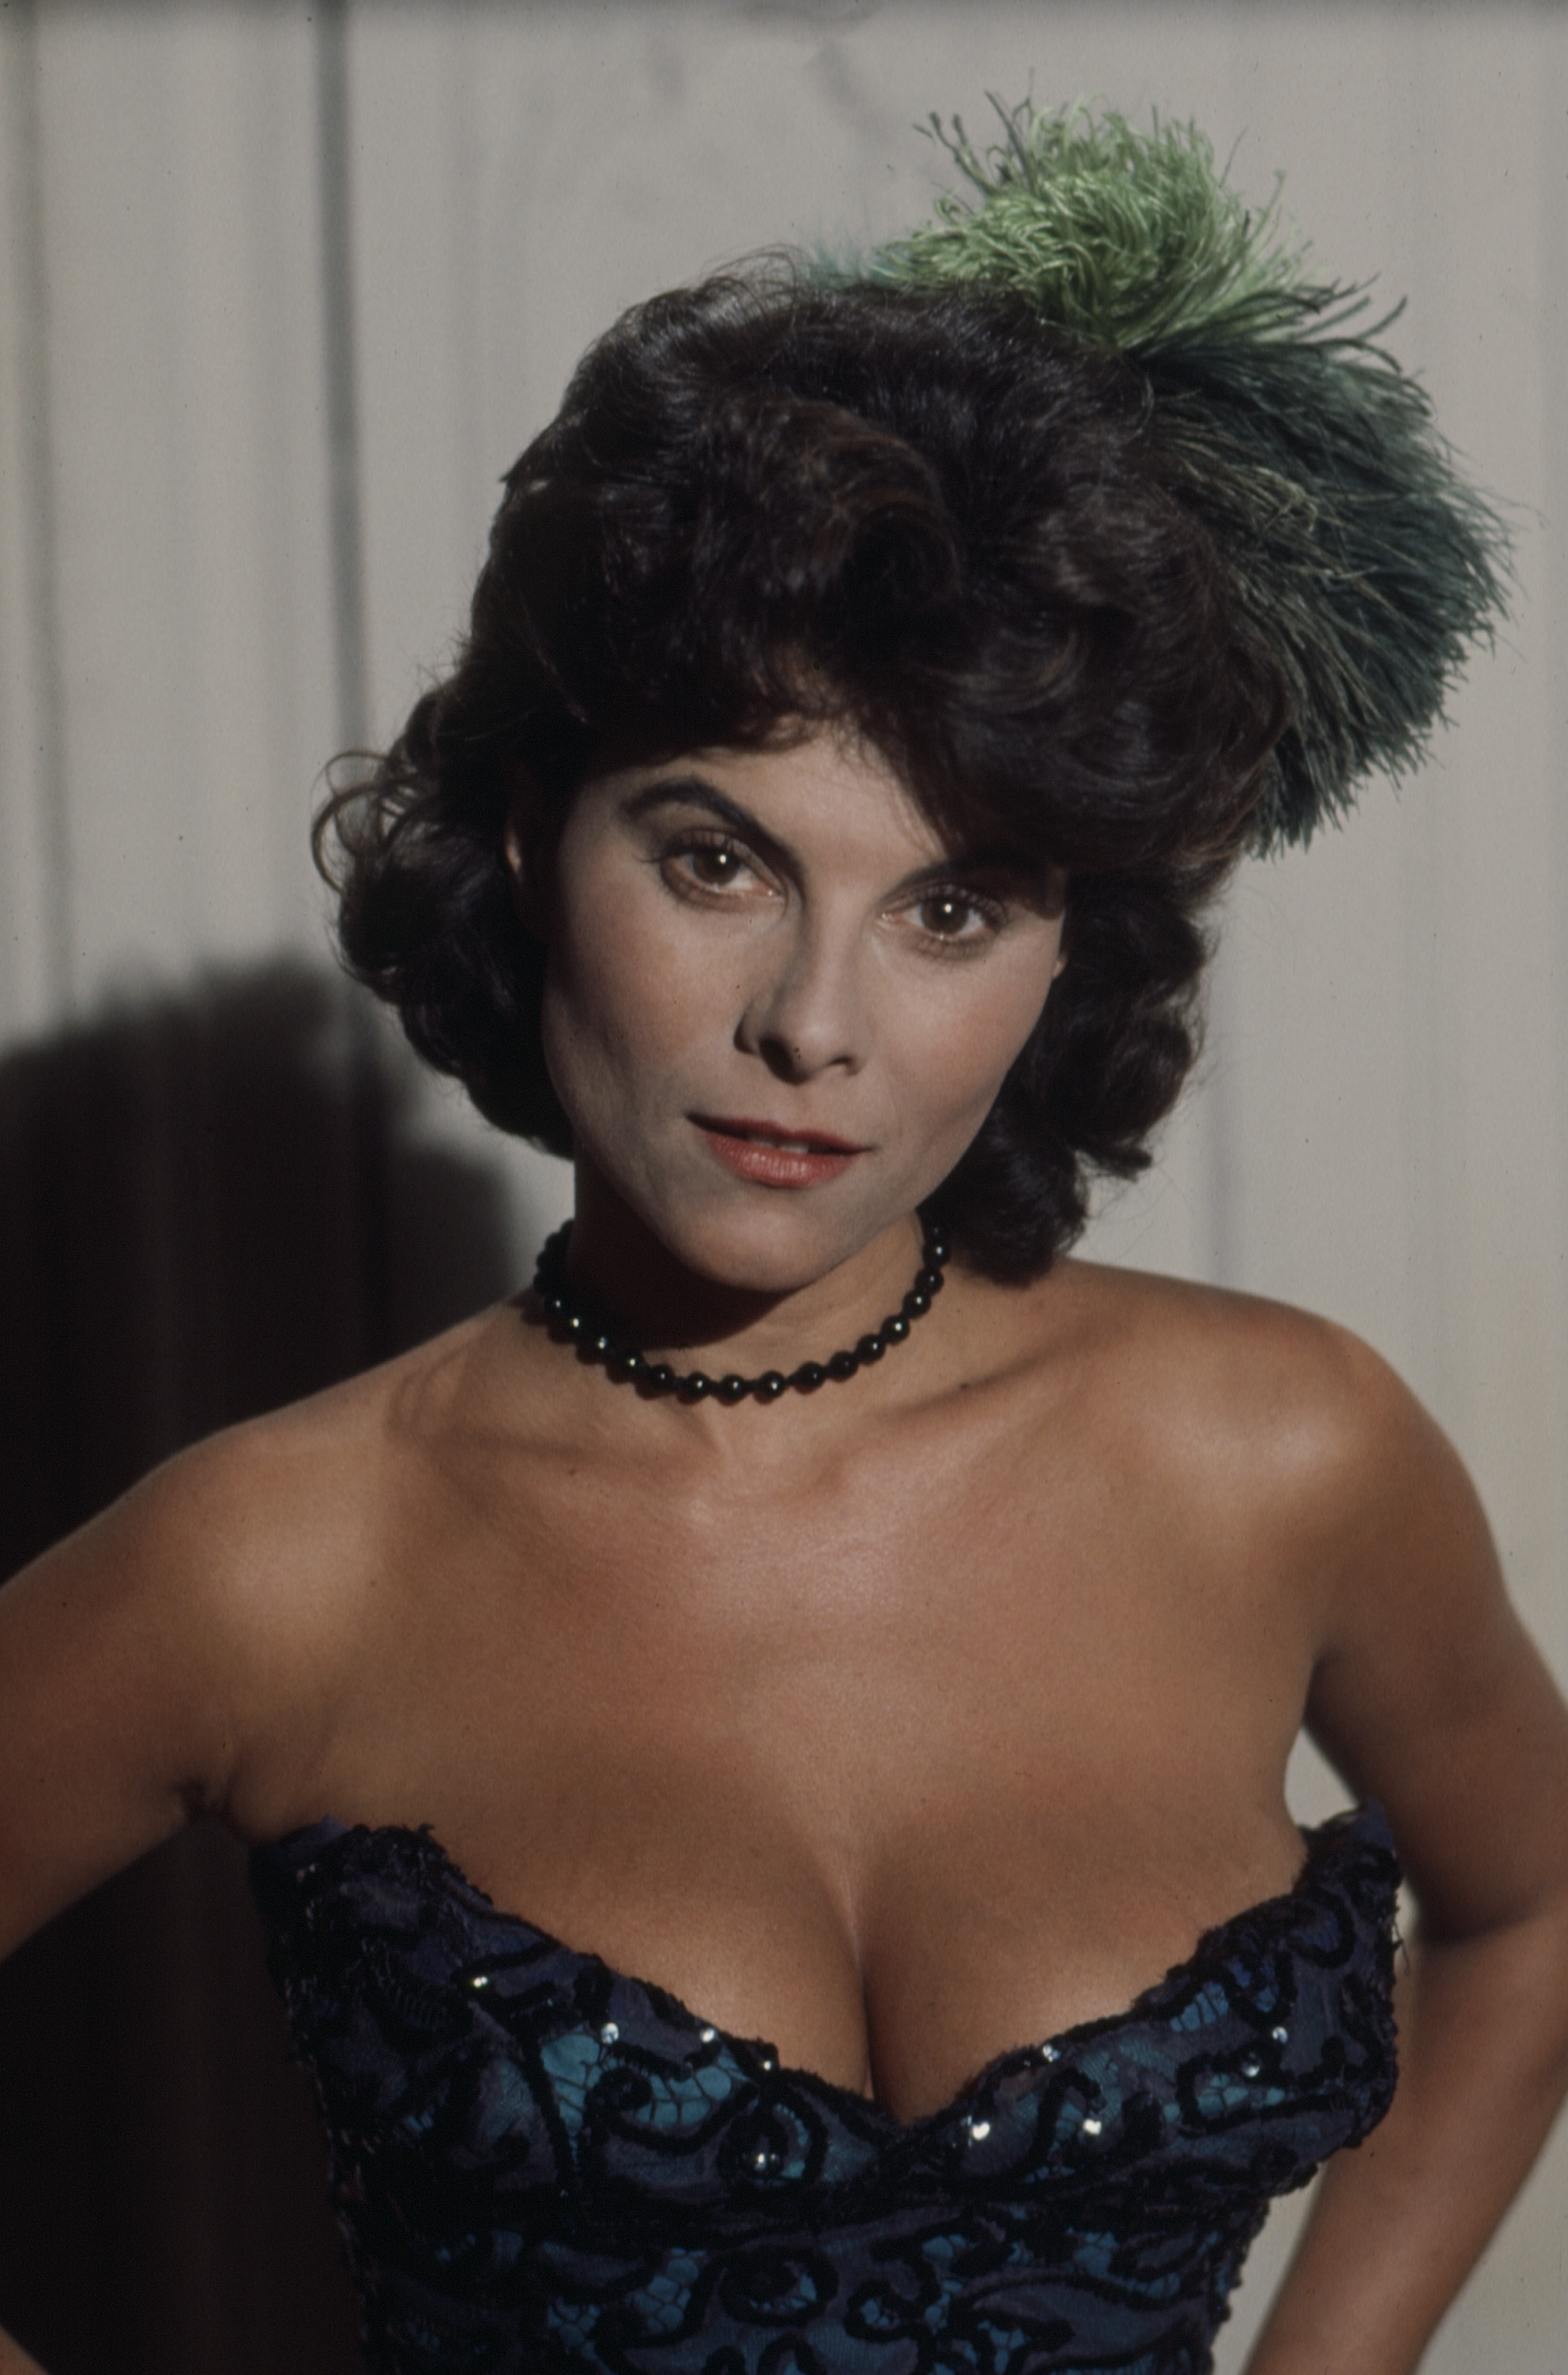 Adrienne Barbeau, circa 1970 | Source: Getty Images